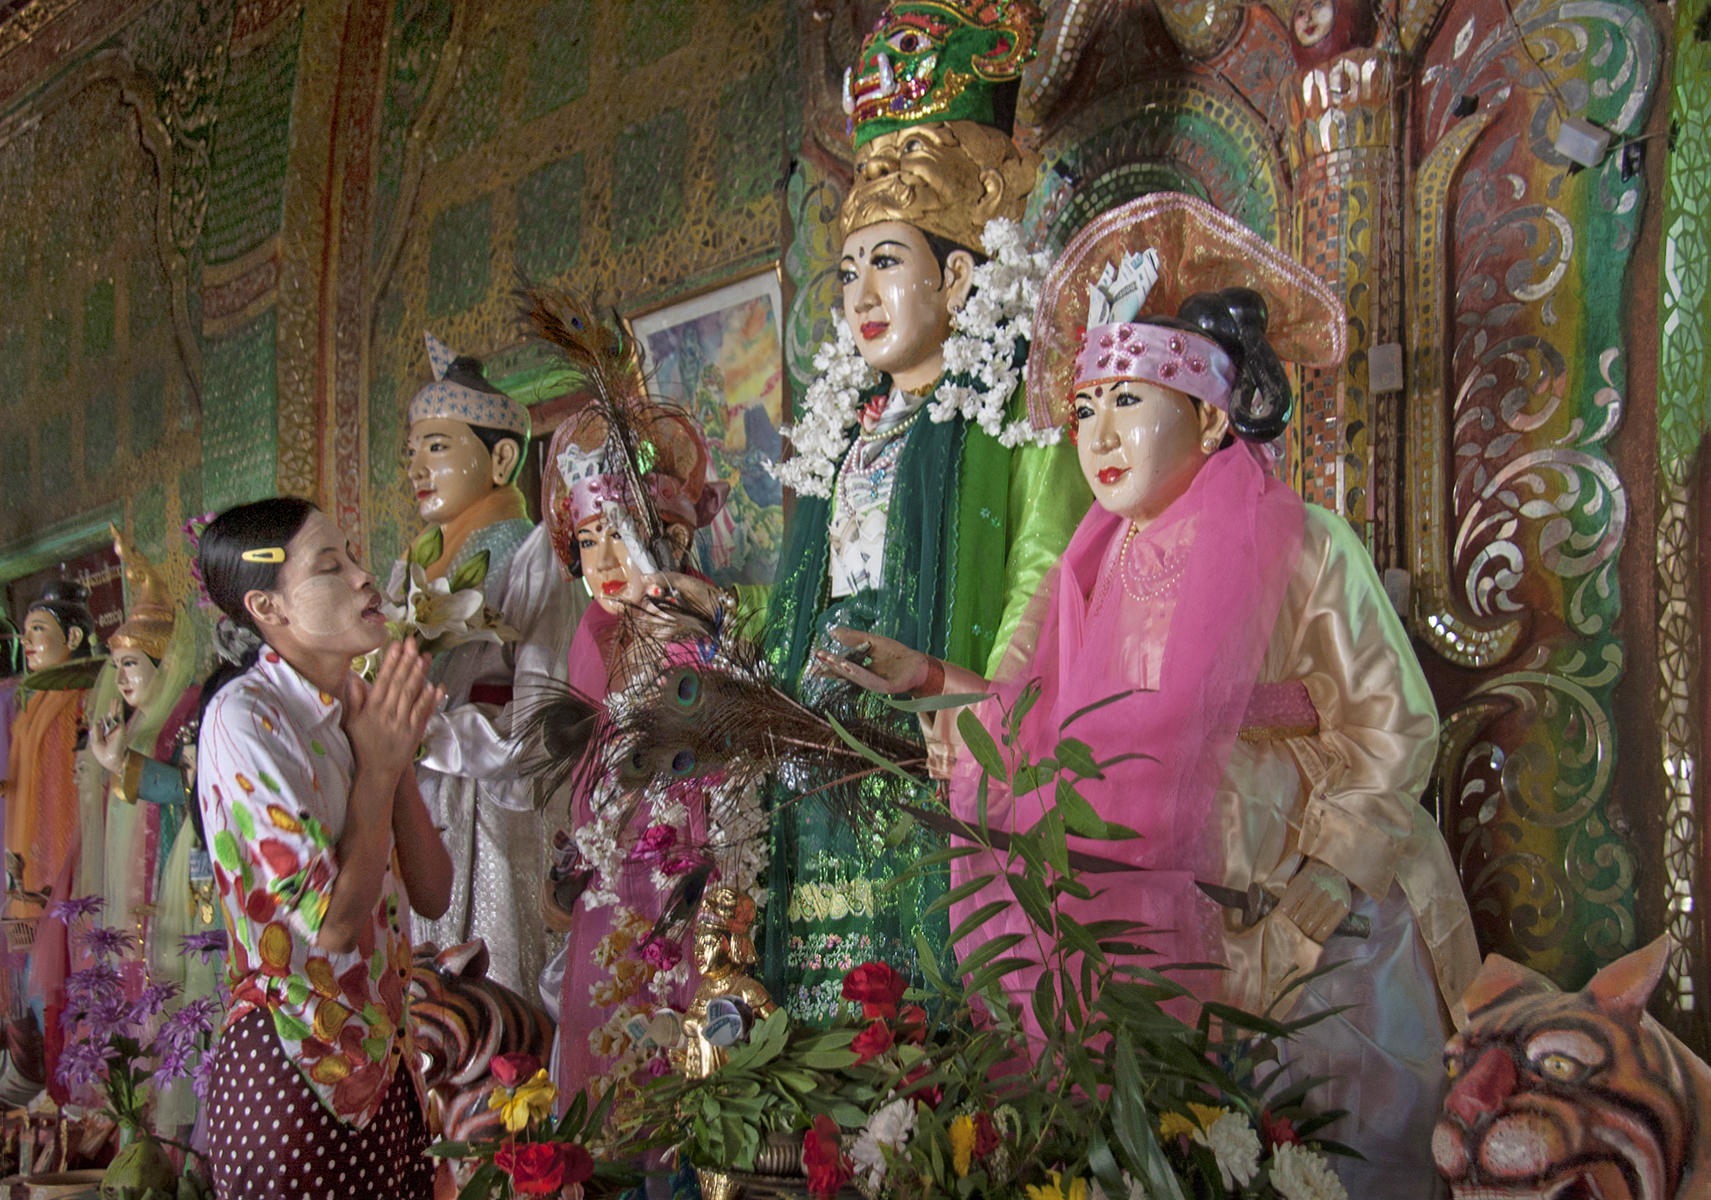 Nats, Temple near Mt. Popa, Myanmar<p><a class="nav-link" href="/content.html?page=6/#TA53" target="_top">Thumbnail</a>